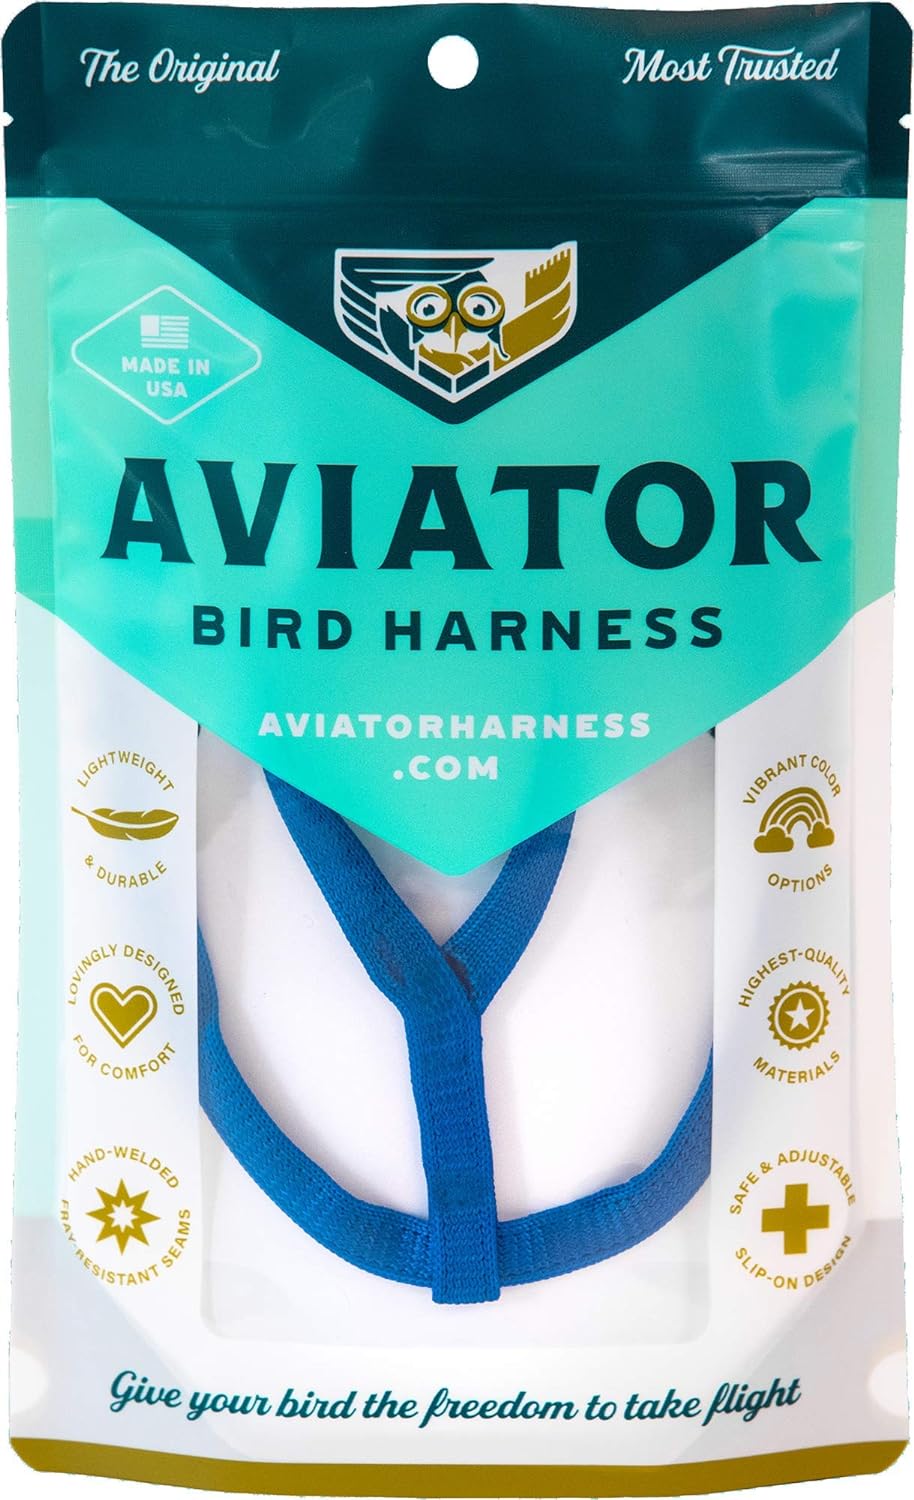 The AVIATOR Pet Bird Harness and Leash: Small Blue?95-0116-BL